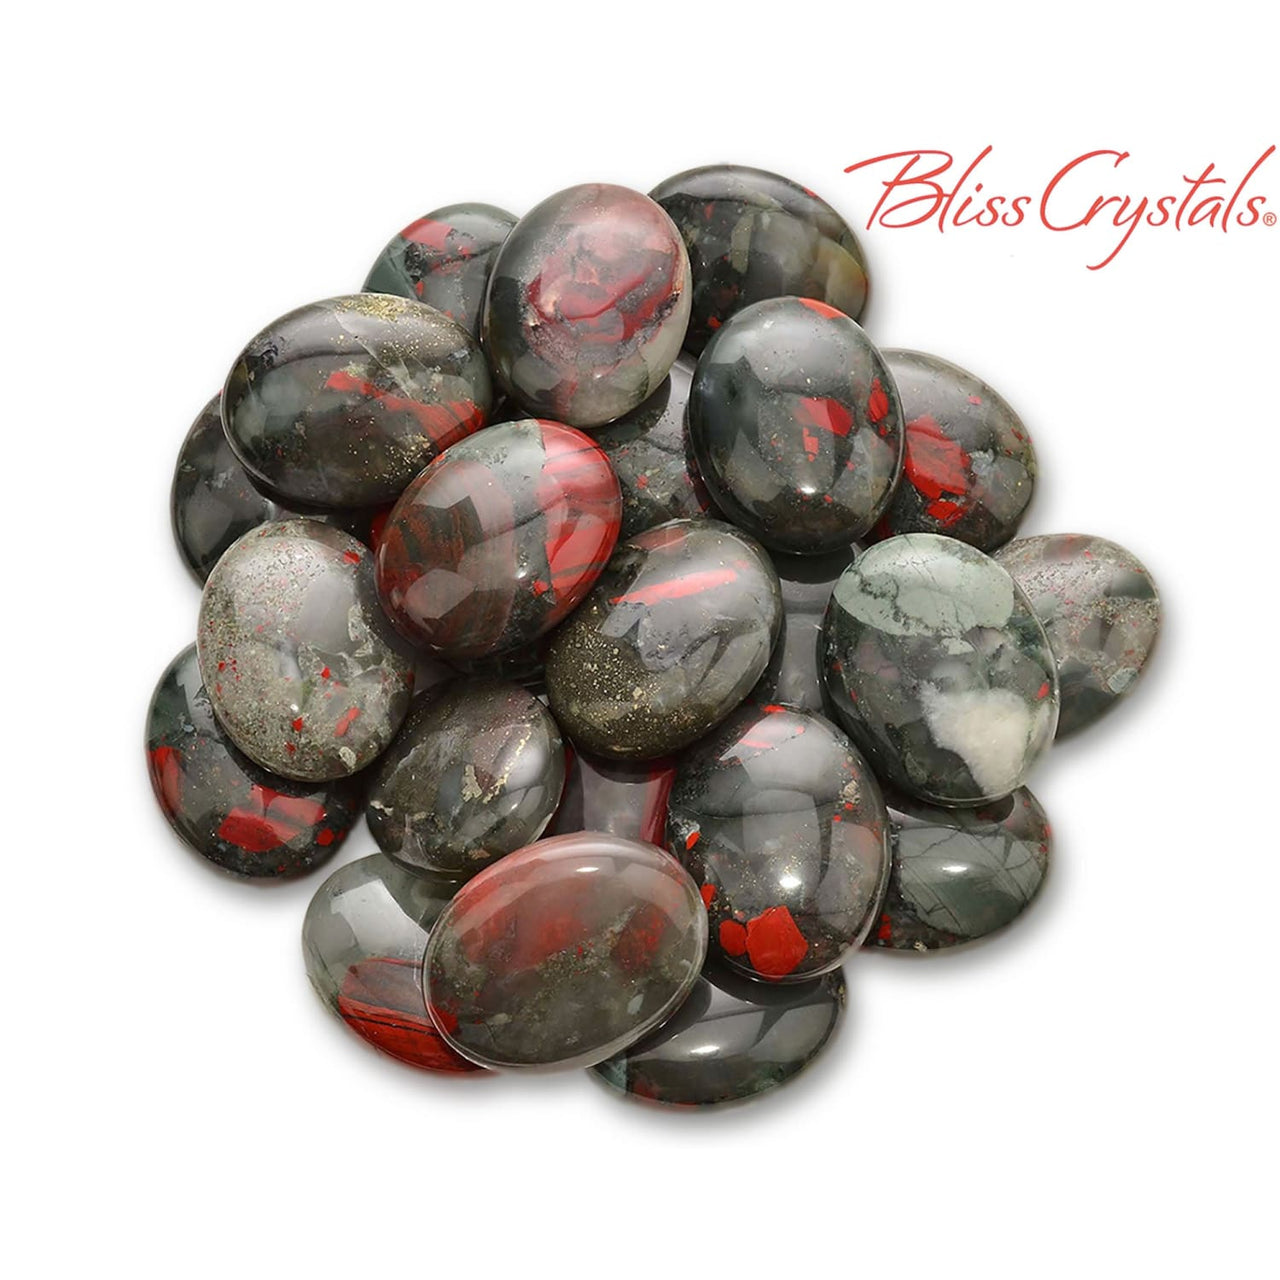 1 African BLOODSTONE Palm Stone Jasper Crystal Healing and 